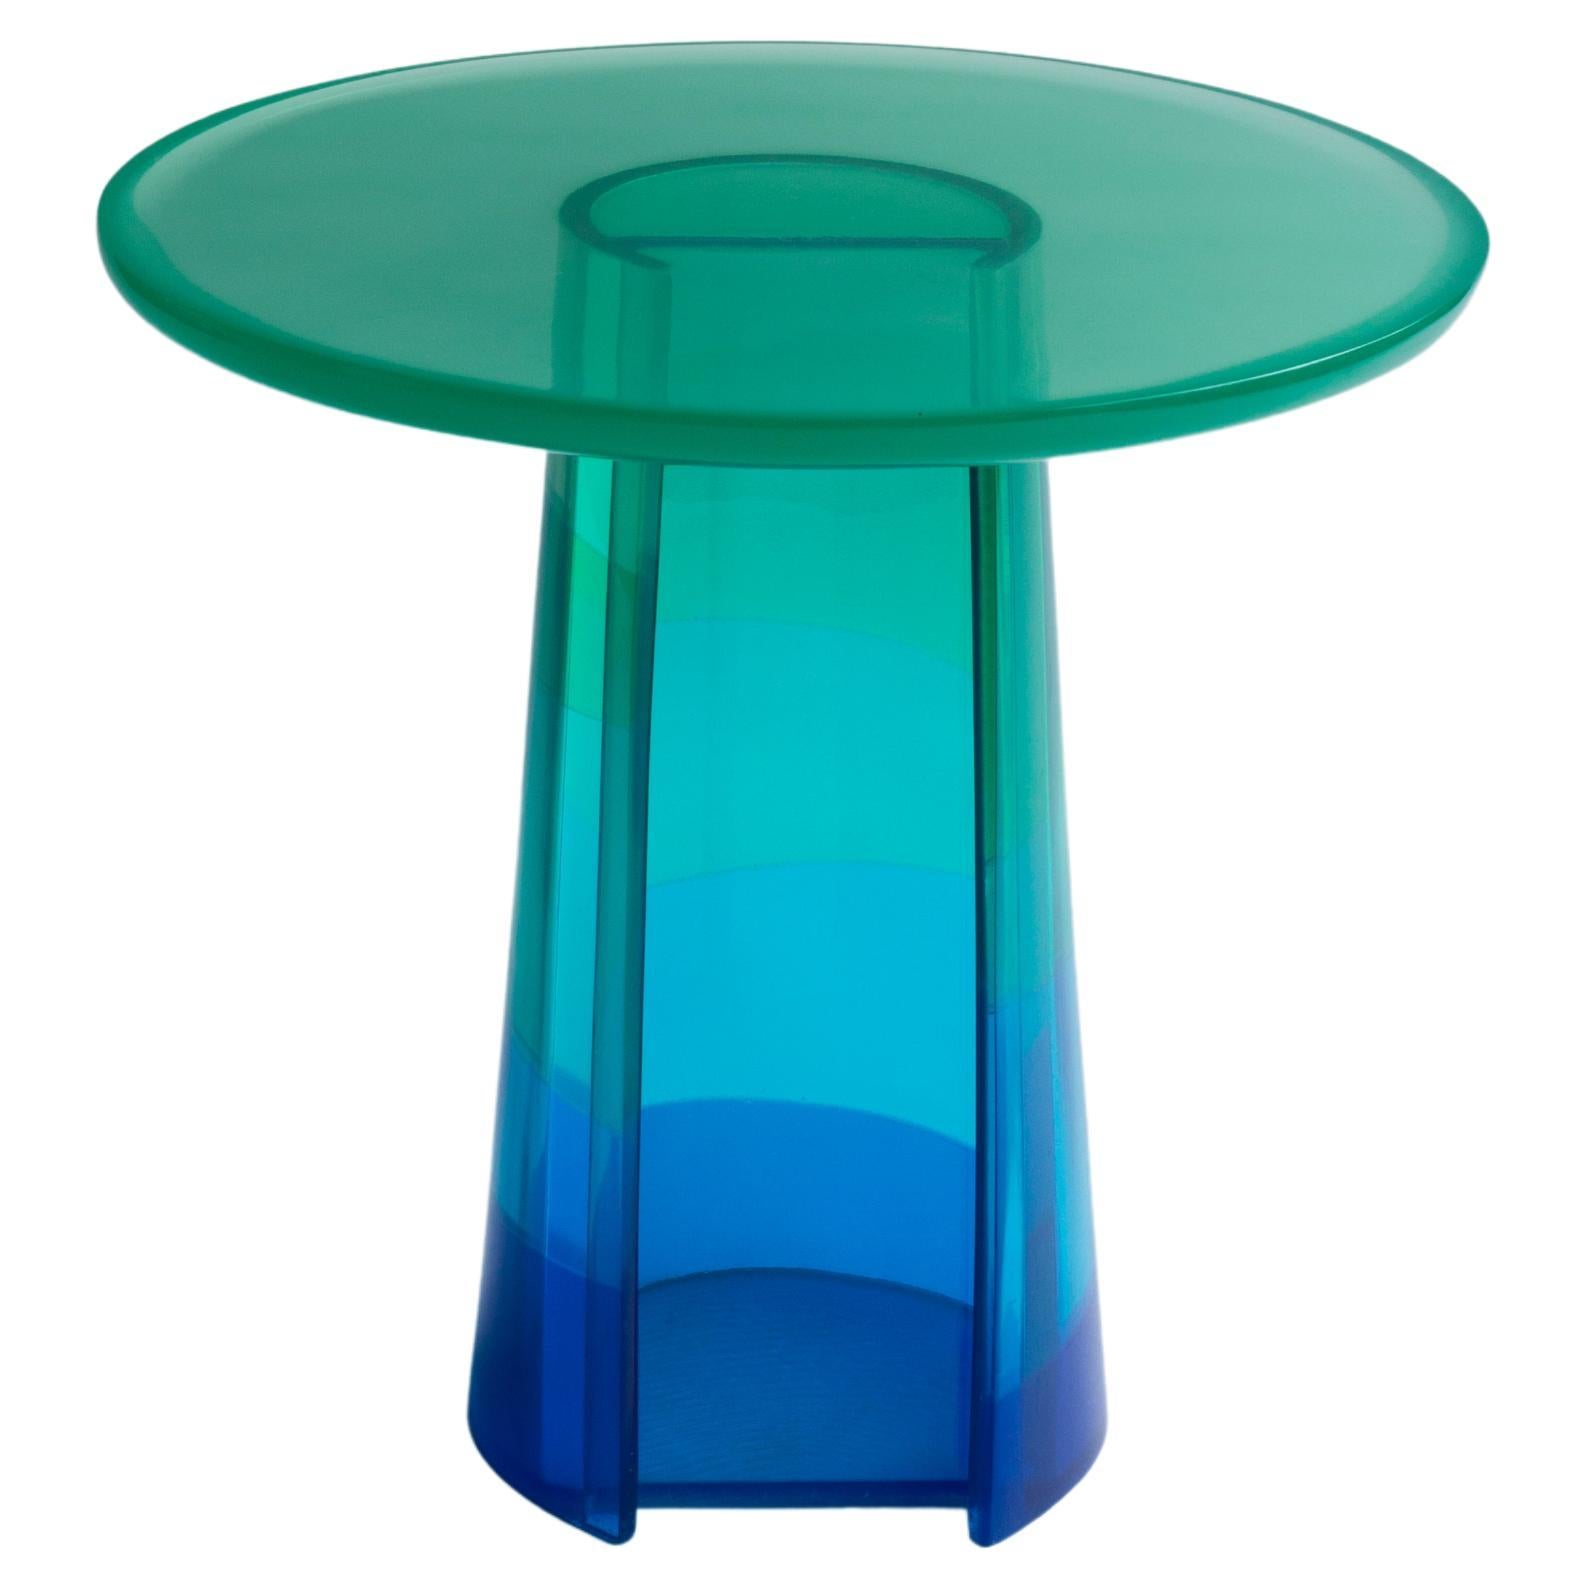 Medium Resin Side Table in Blue Gradient by Paola Valle